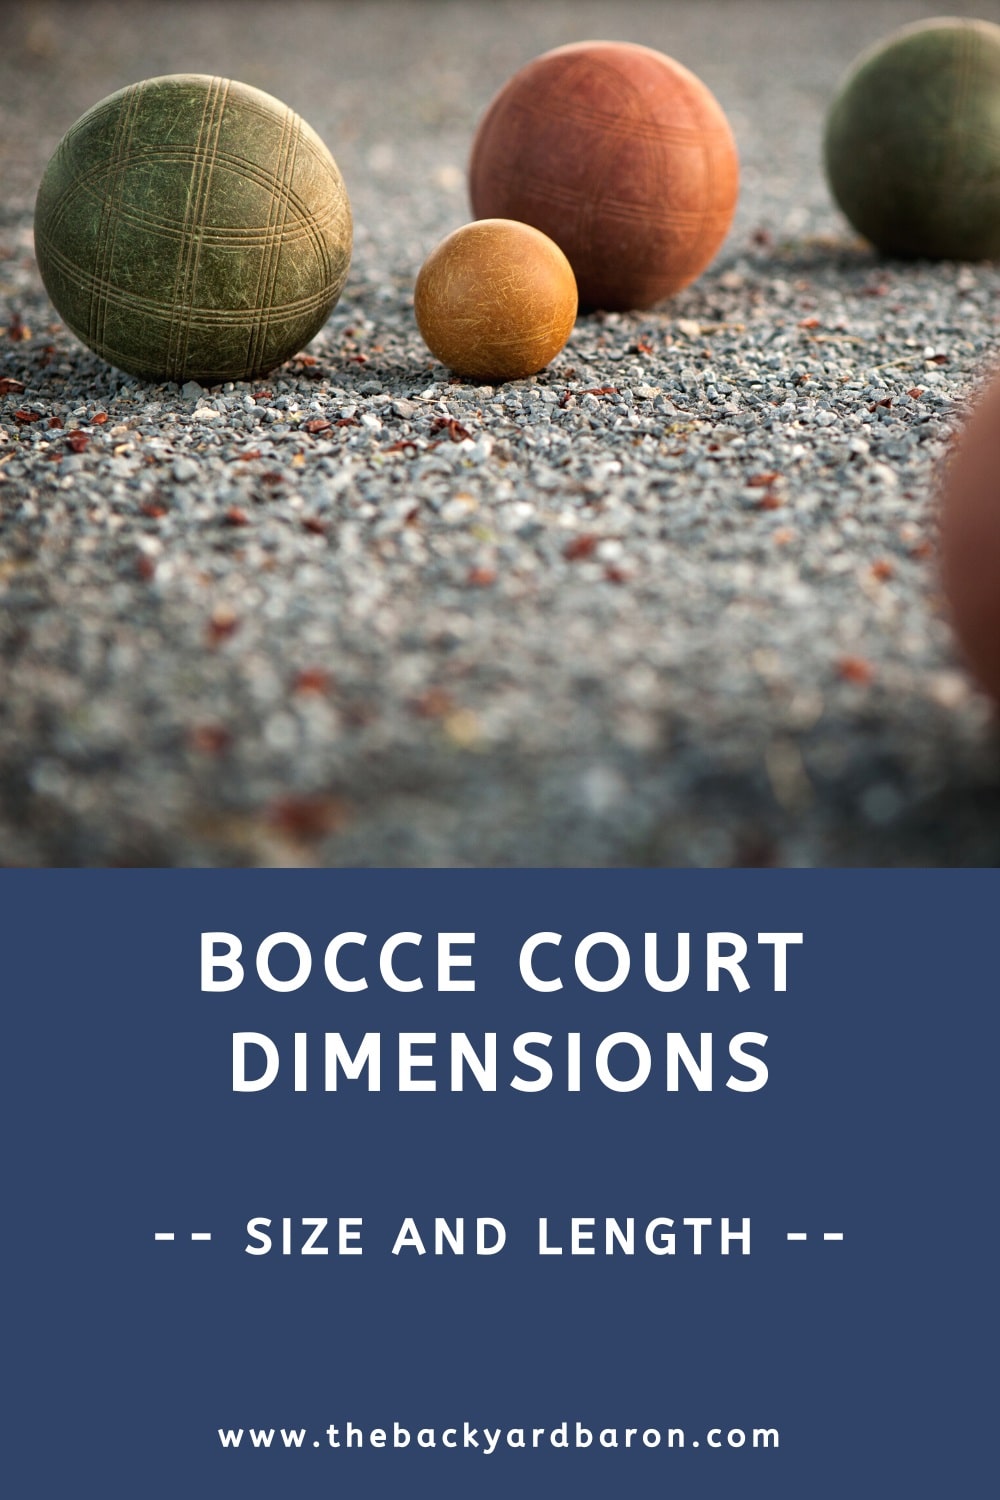 Bocce court dimensions (size and length)